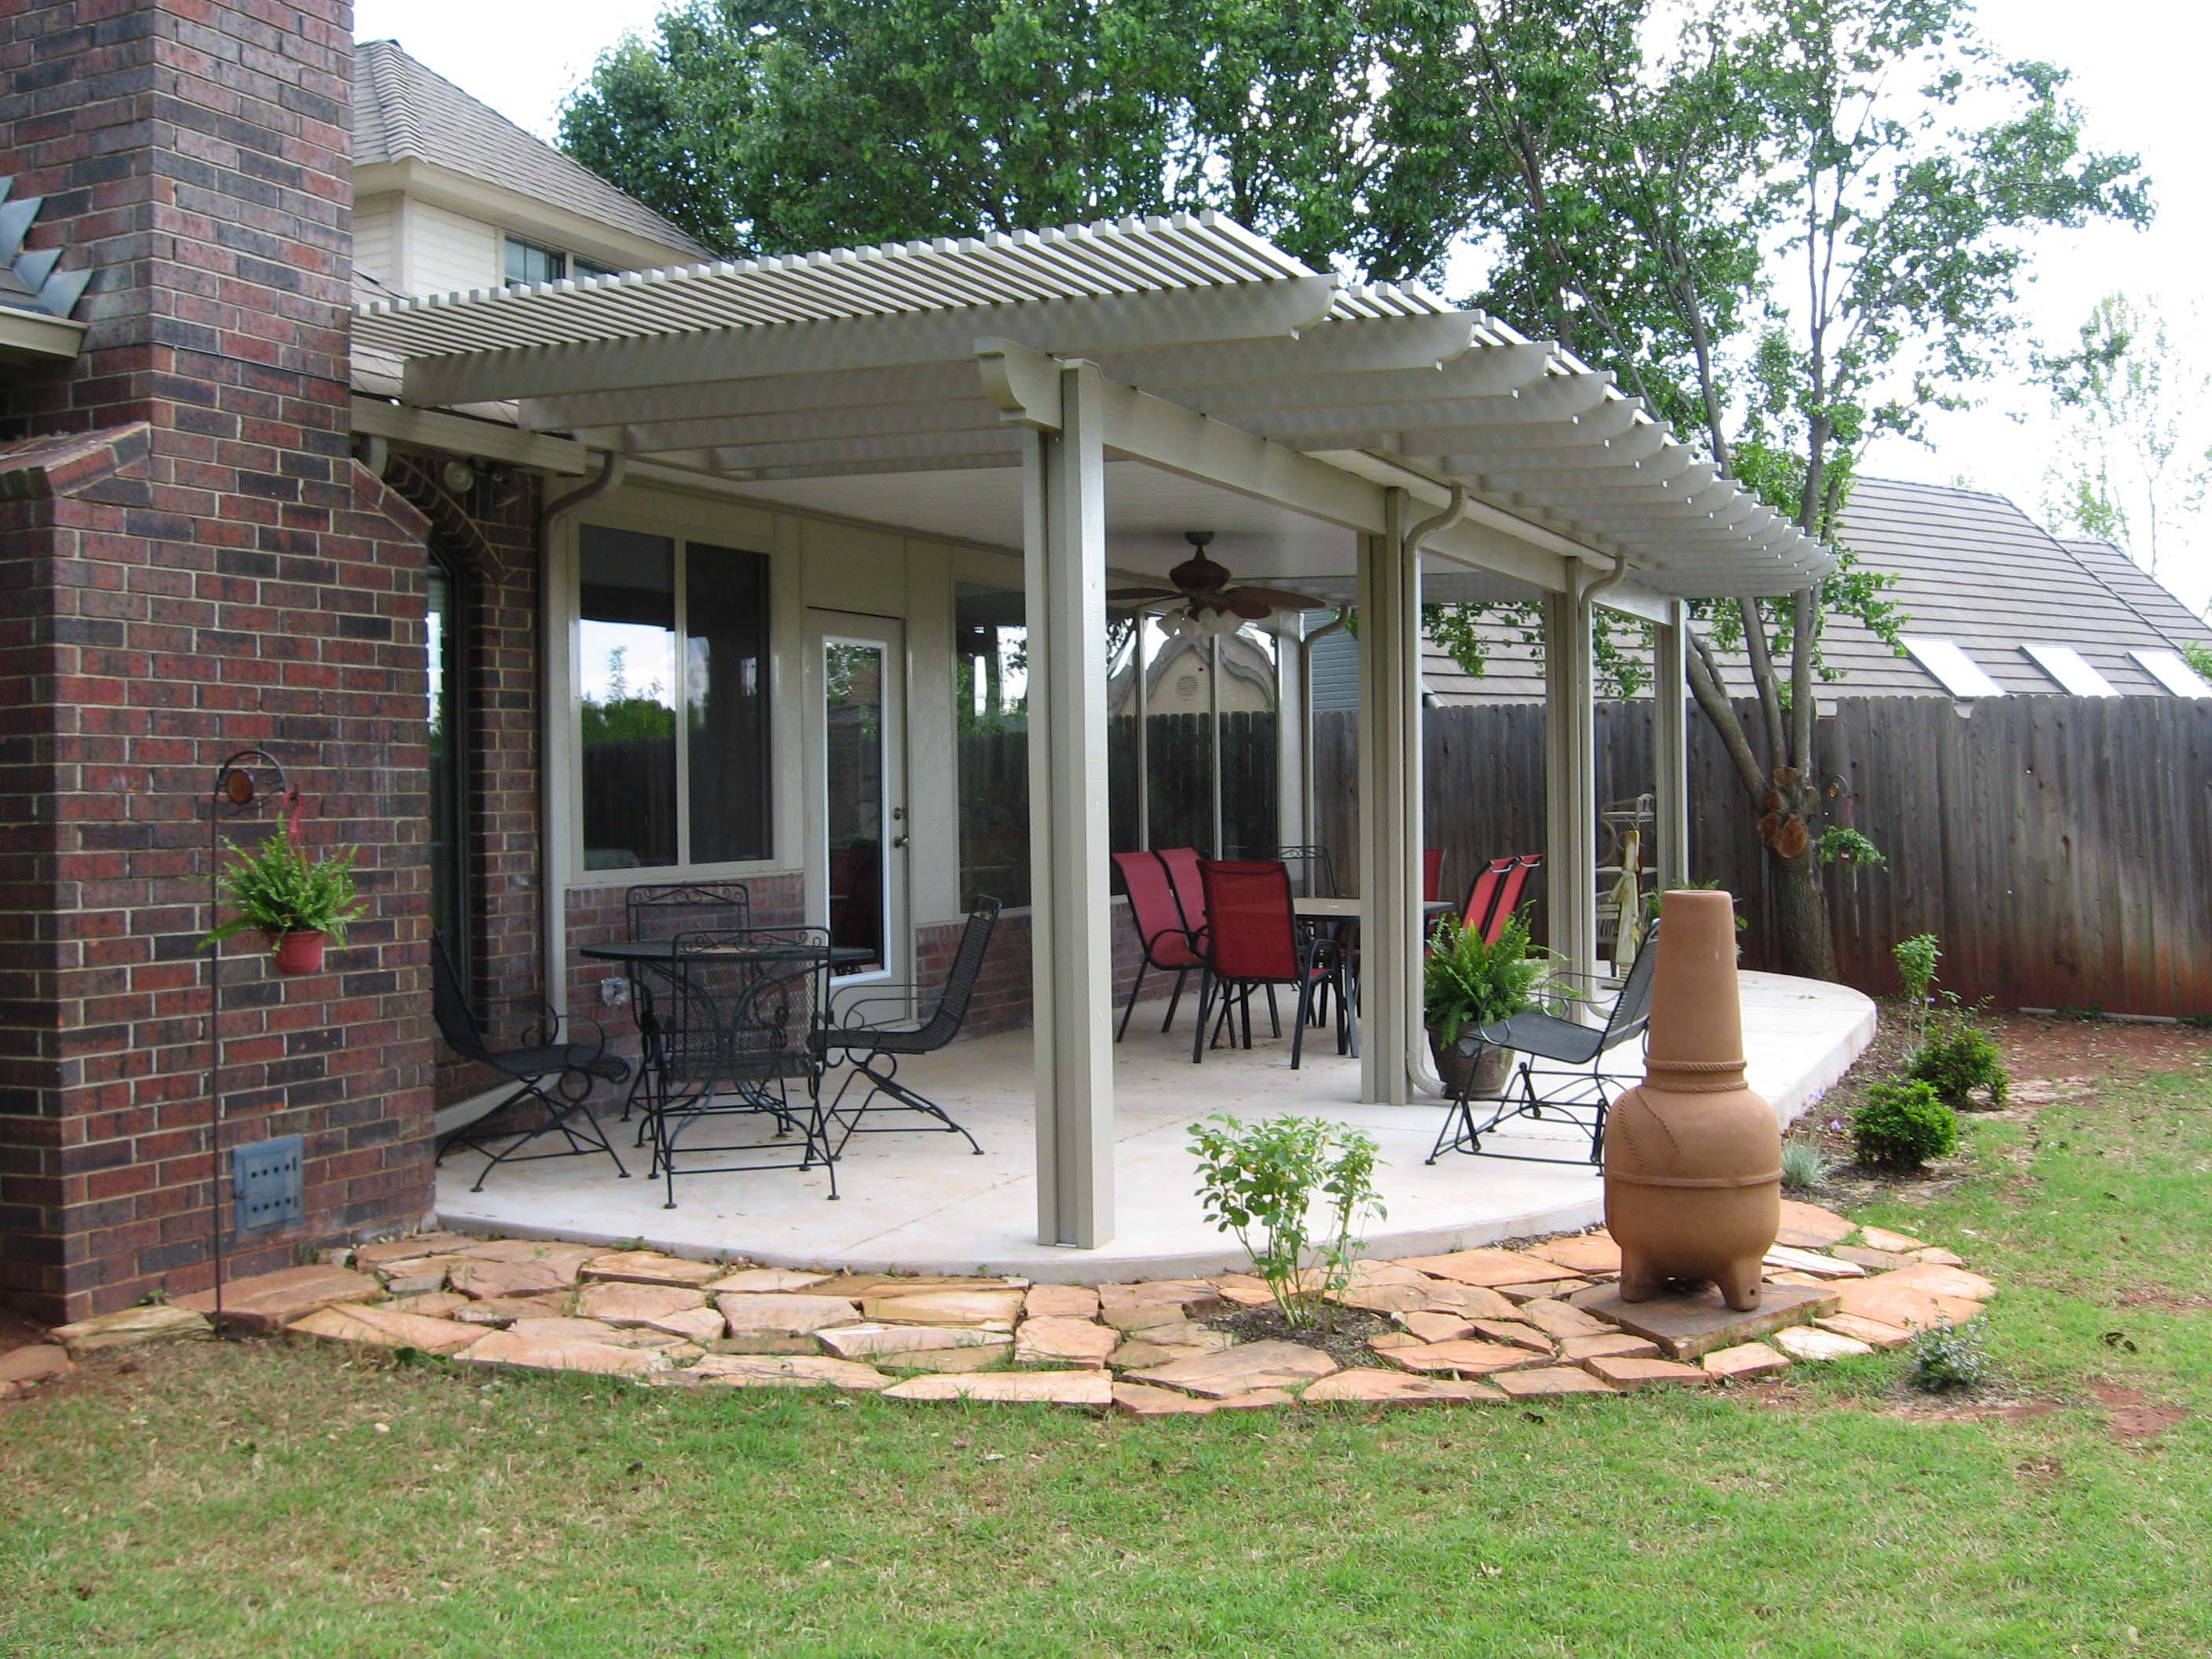 best pergola ideas and designs you will love in 2019 and 10 awesome ideas how to build backyard pergola ideas